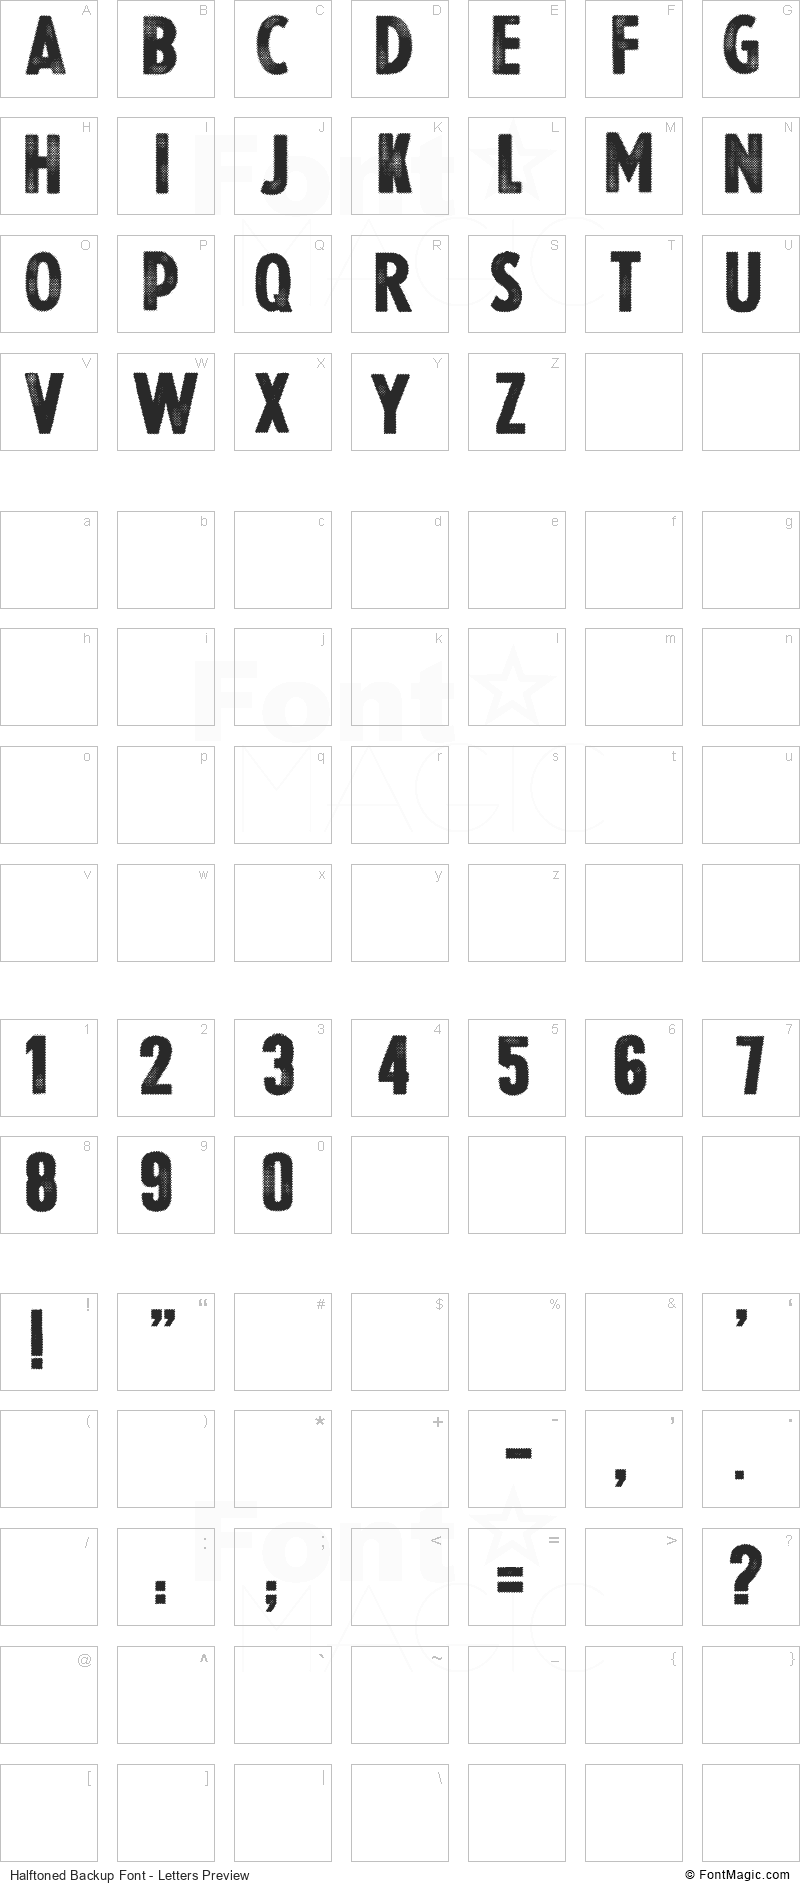 Halftoned Backup Font - All Latters Preview Chart